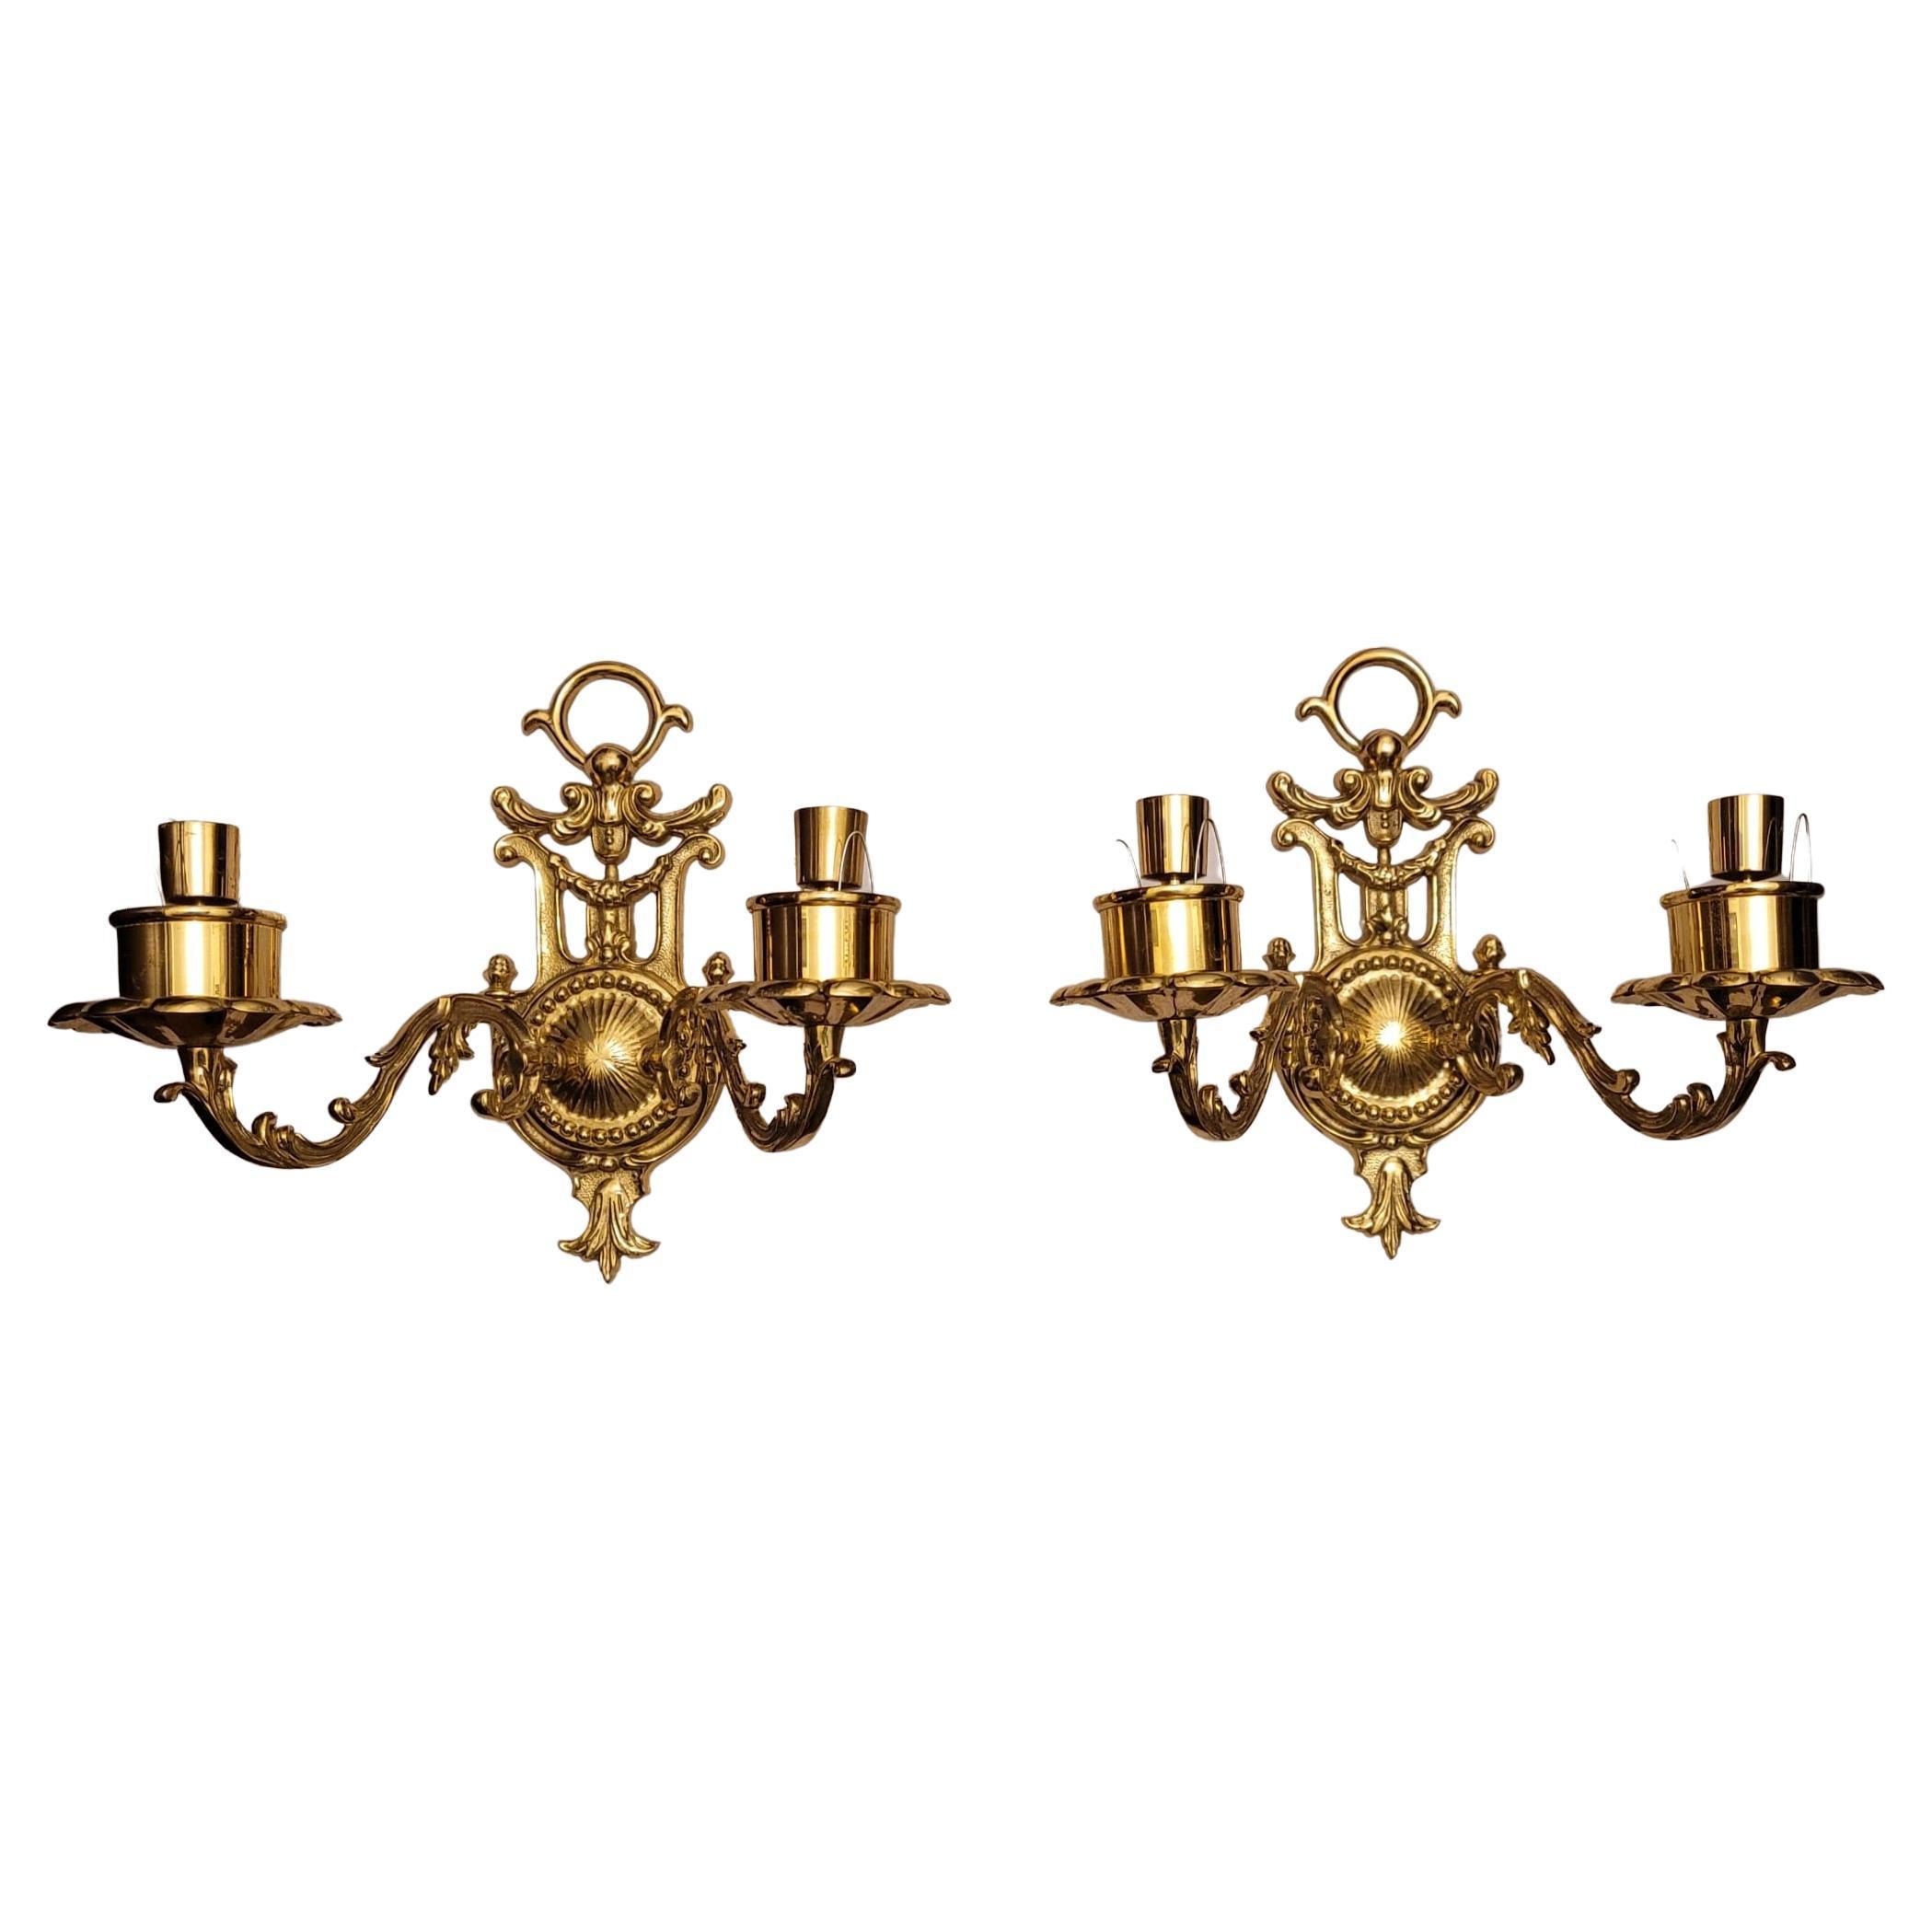 Pair of Regency Cast Brass Two-Candle Wall Sconces